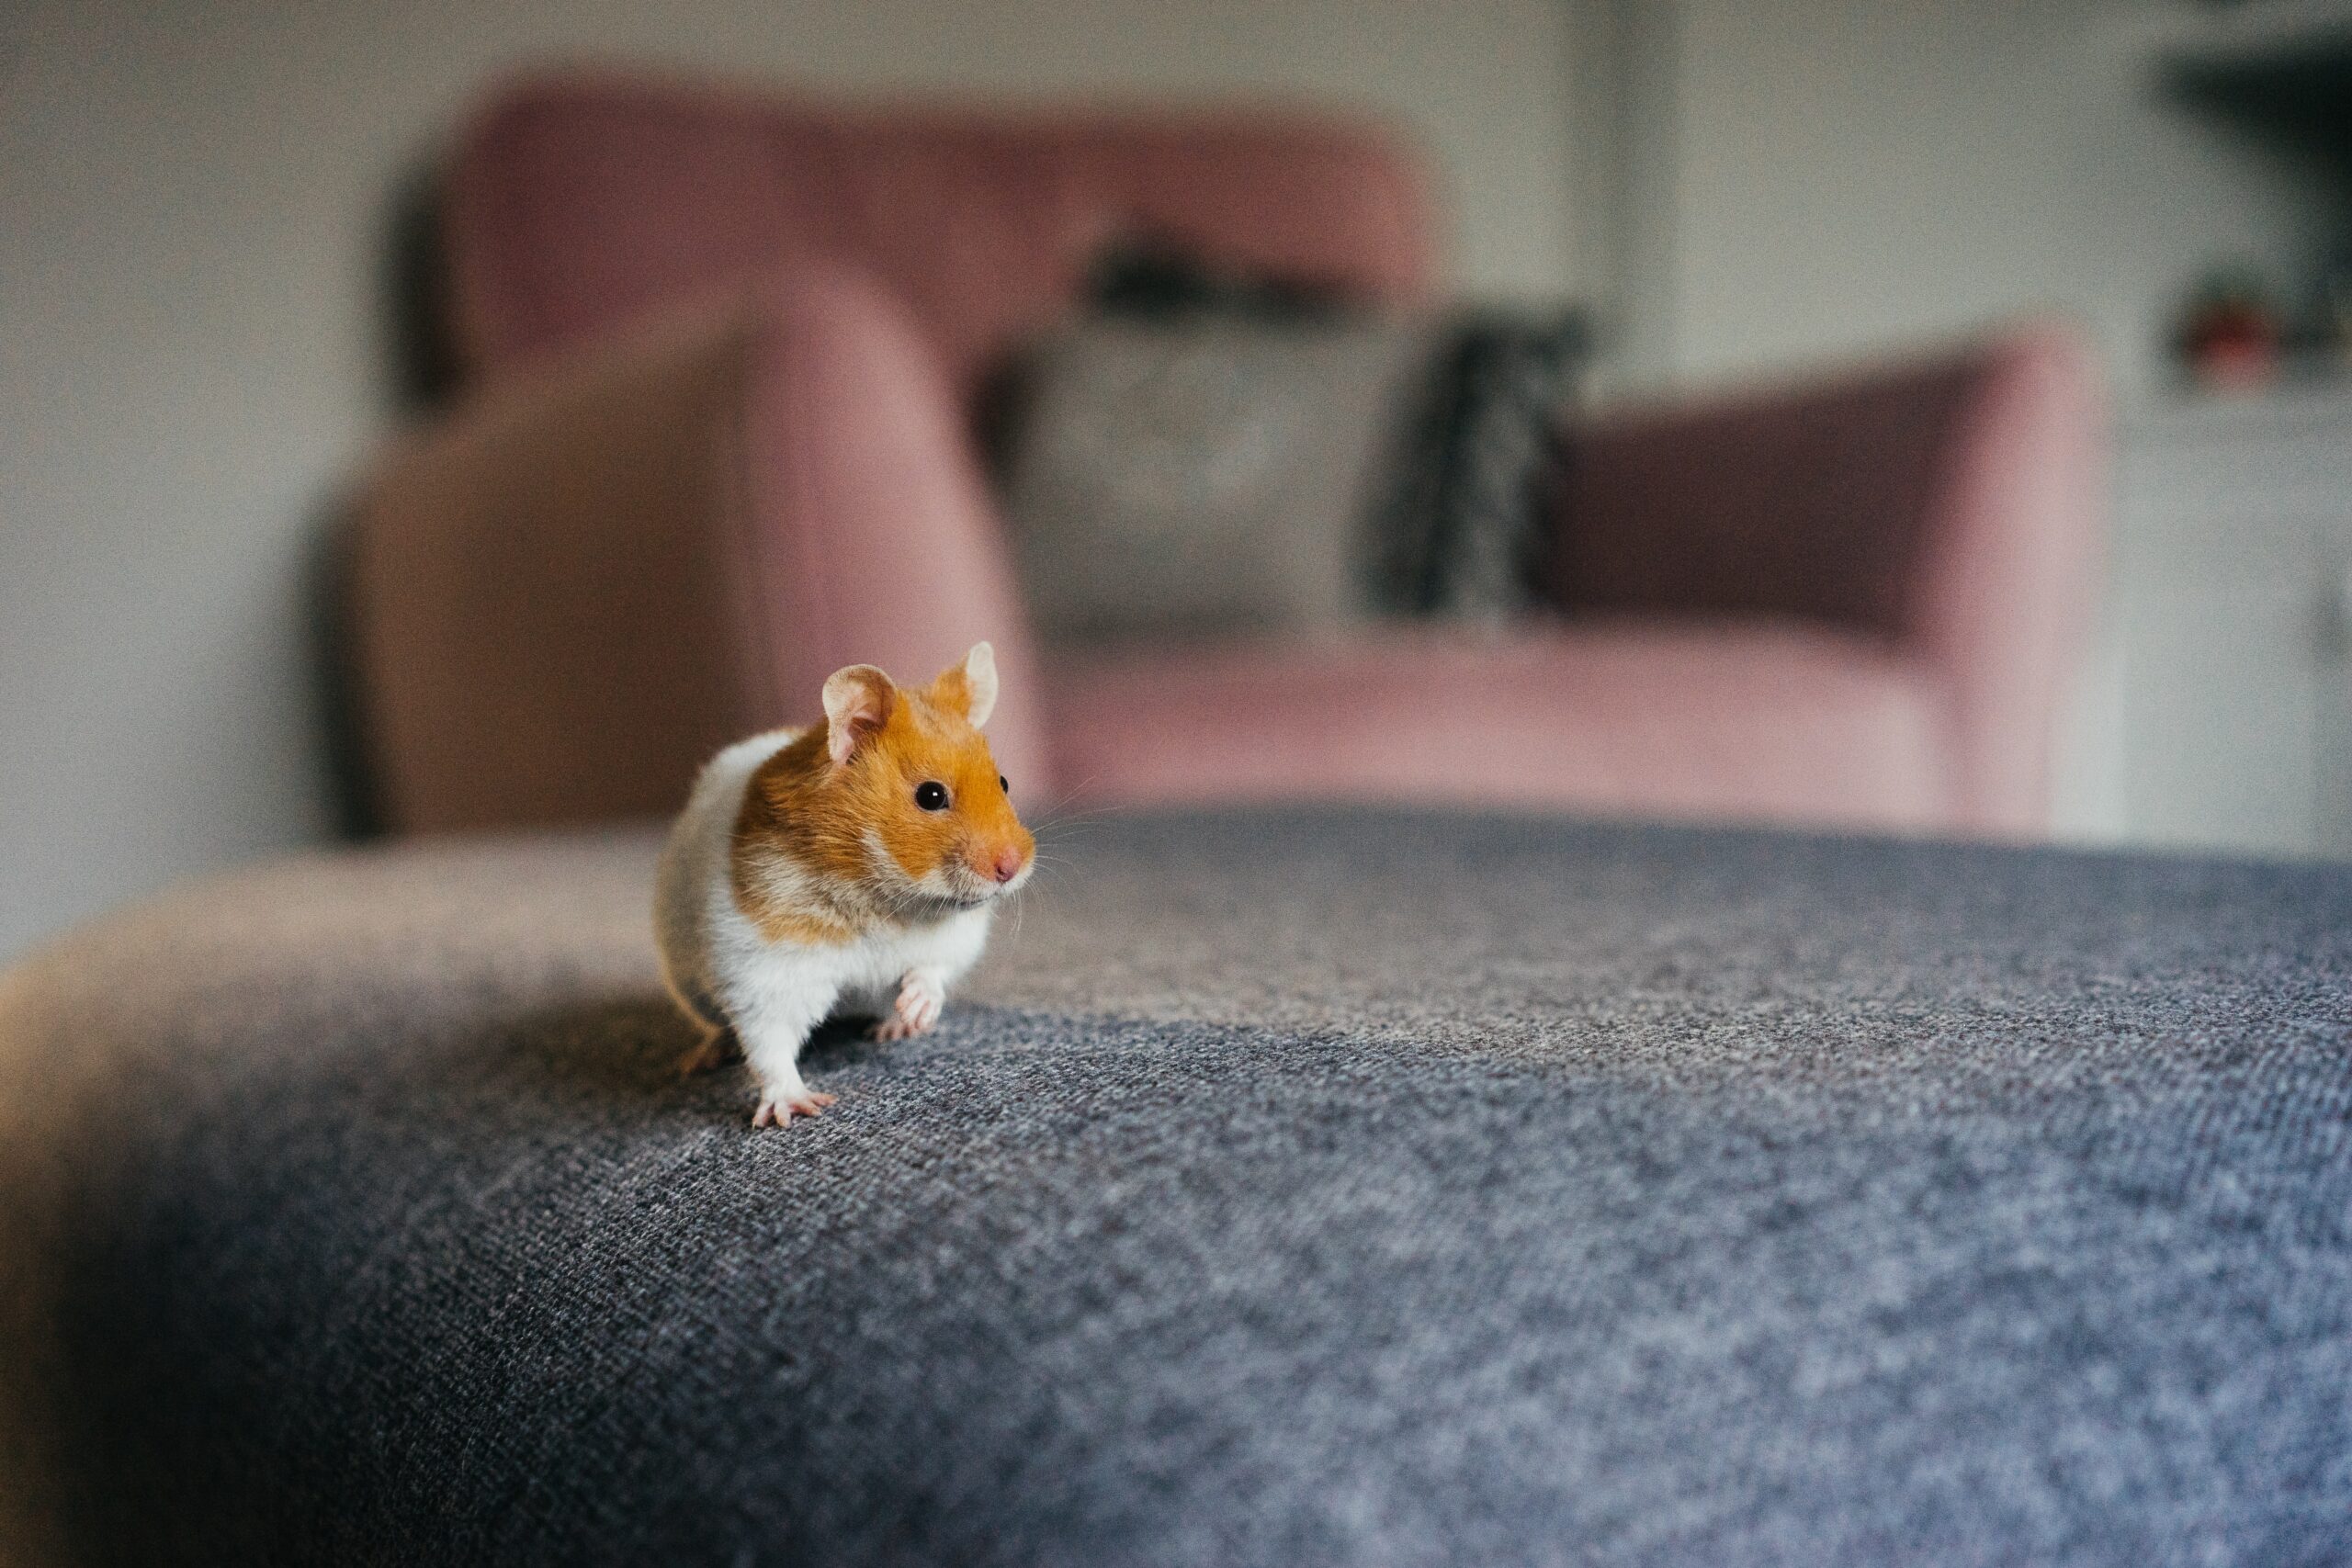 Can I hold my hamster on the first day?